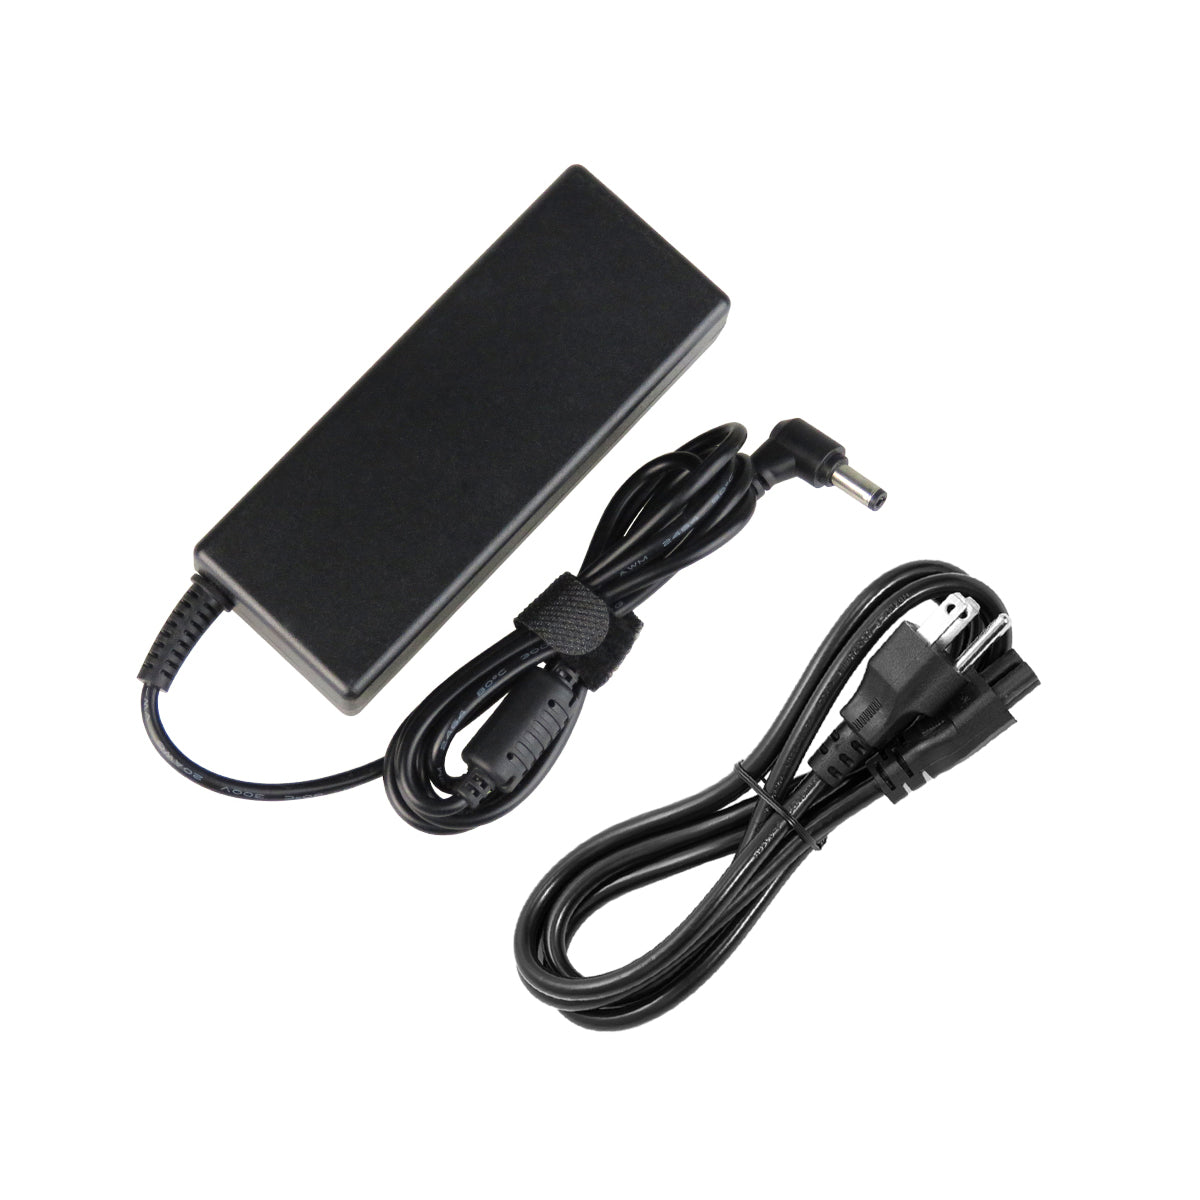 AC Adapter Charger for Gateway M-7800 Notebook.